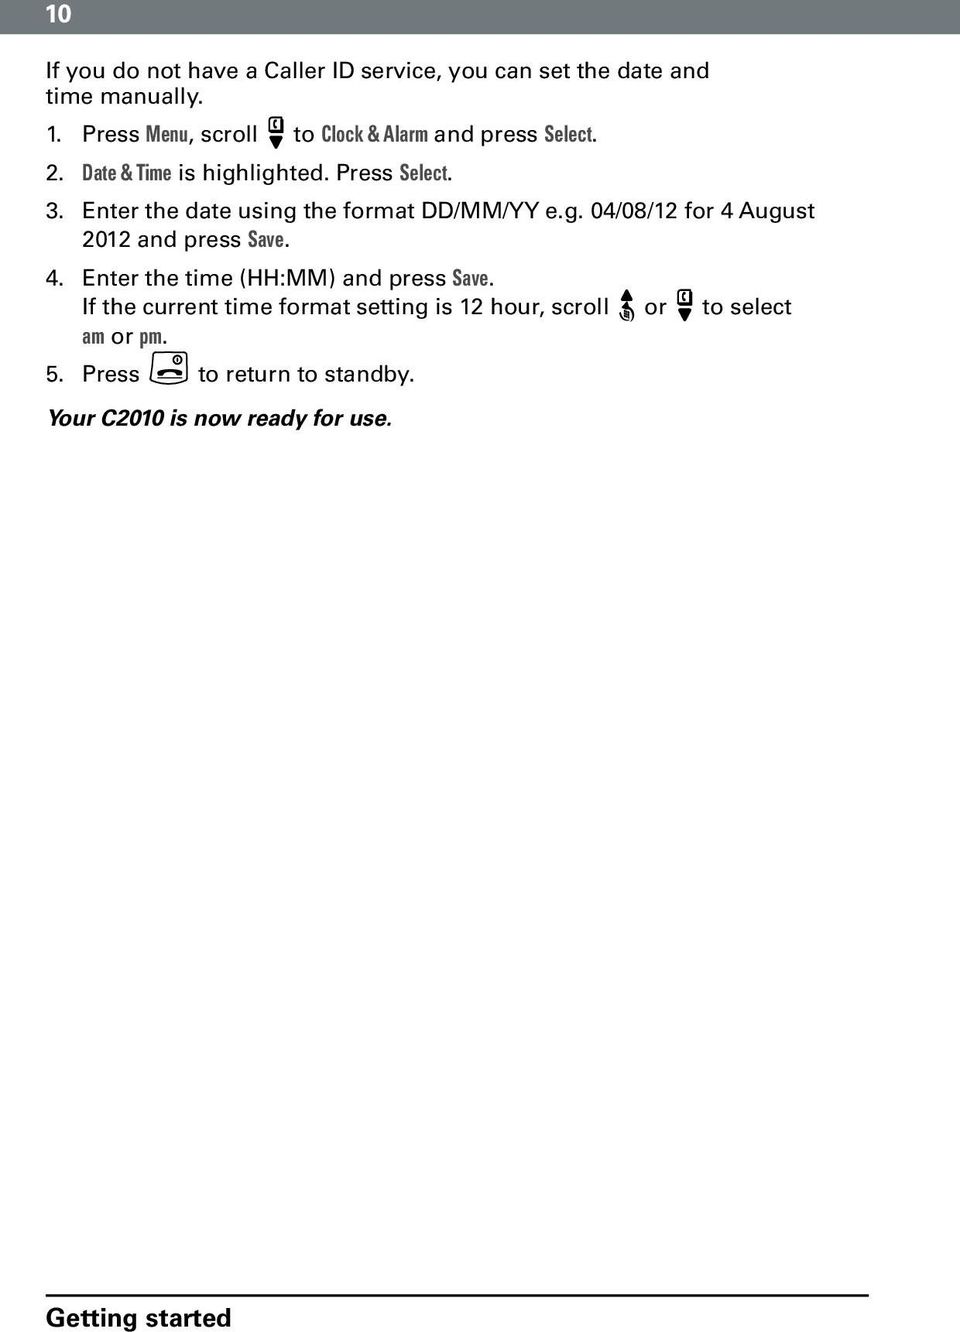 Enter the date using the format DD/MM/YY e.g. 04/08/12 for 4 August 2012 and press Save. 4. Enter the time (HH:MM) and press Save.